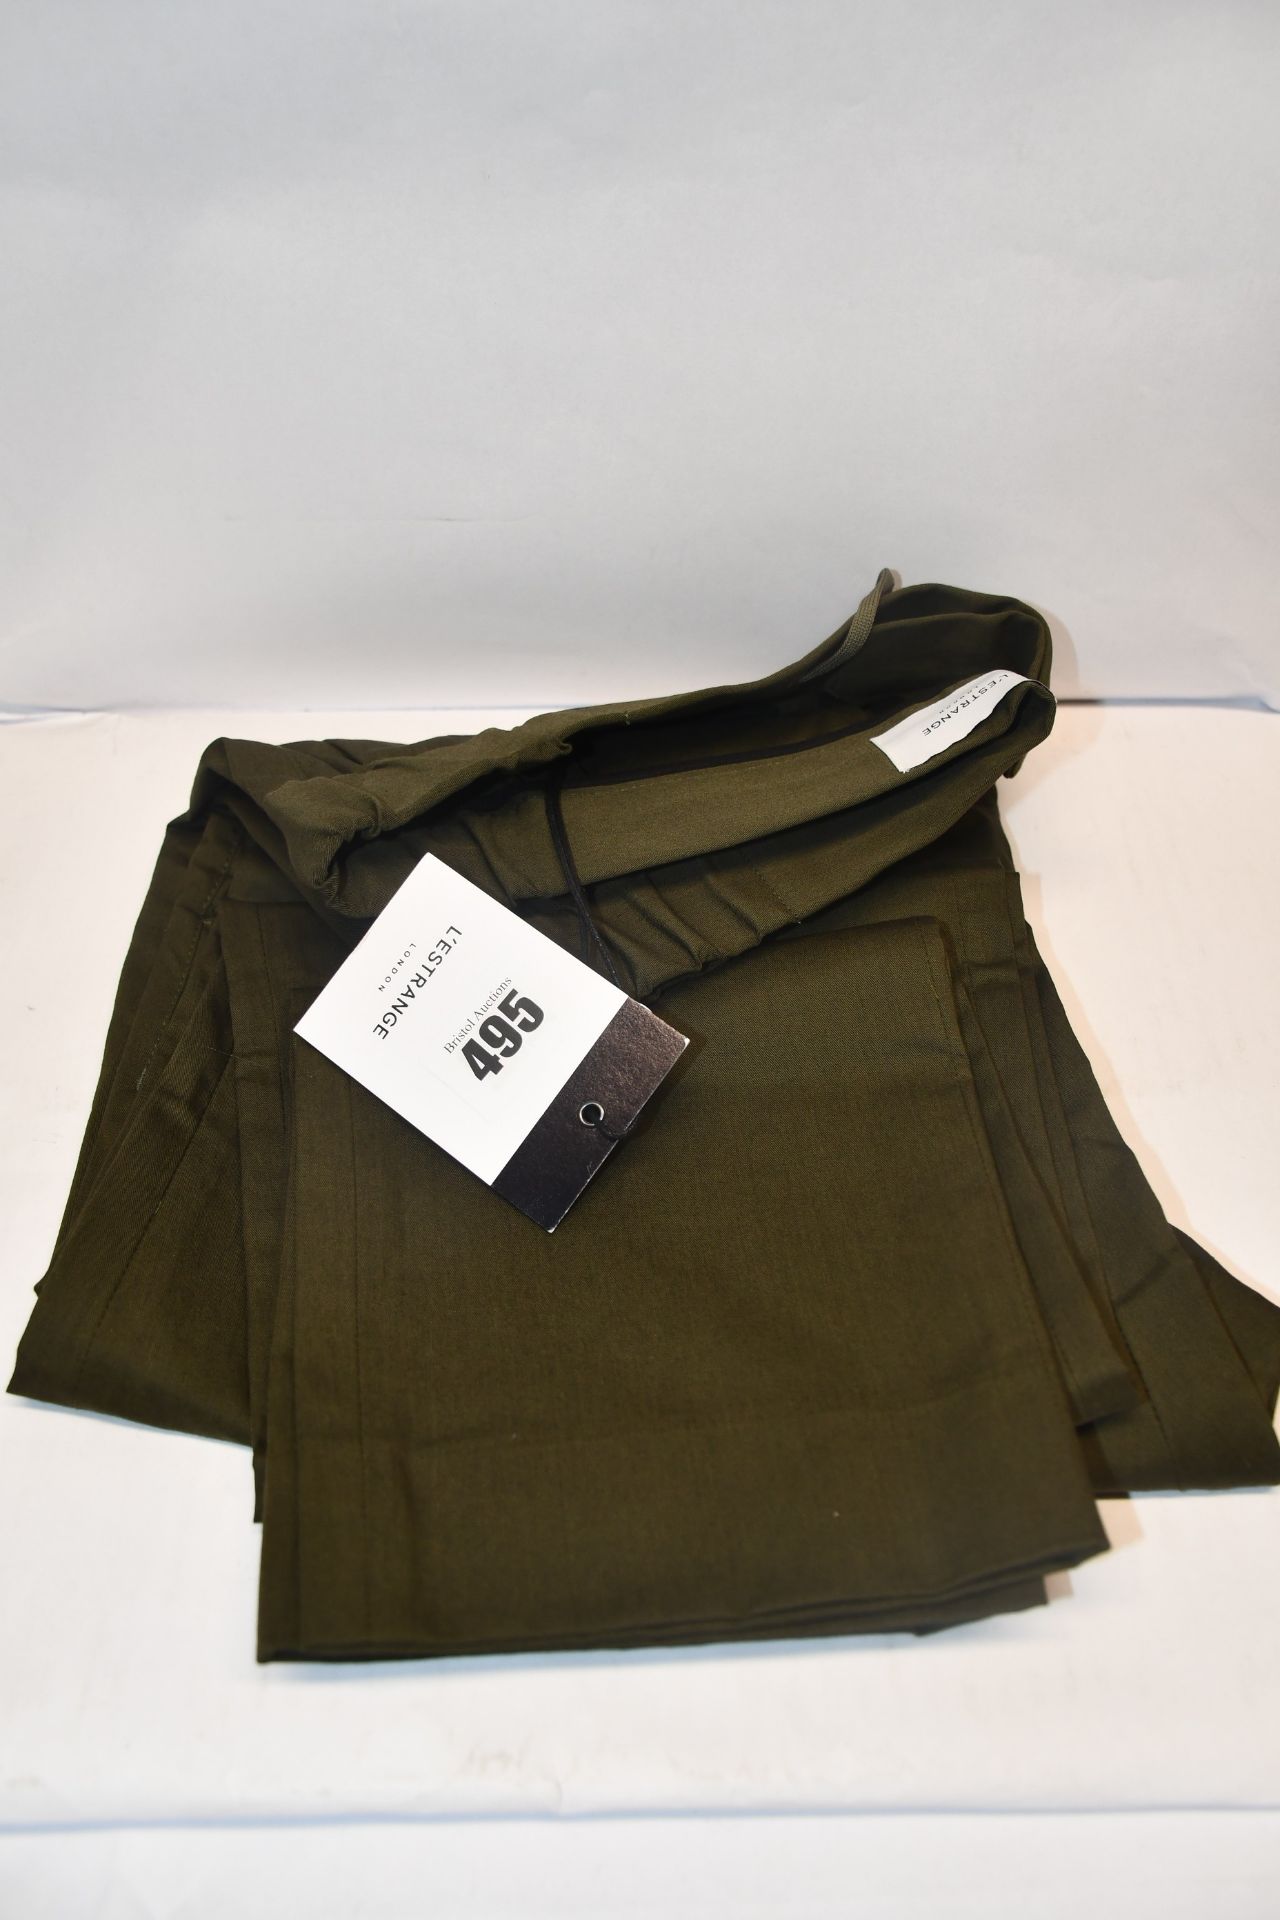 A pair of as new L'Estrange The 24 trousers in khaki (L - RRP £125).